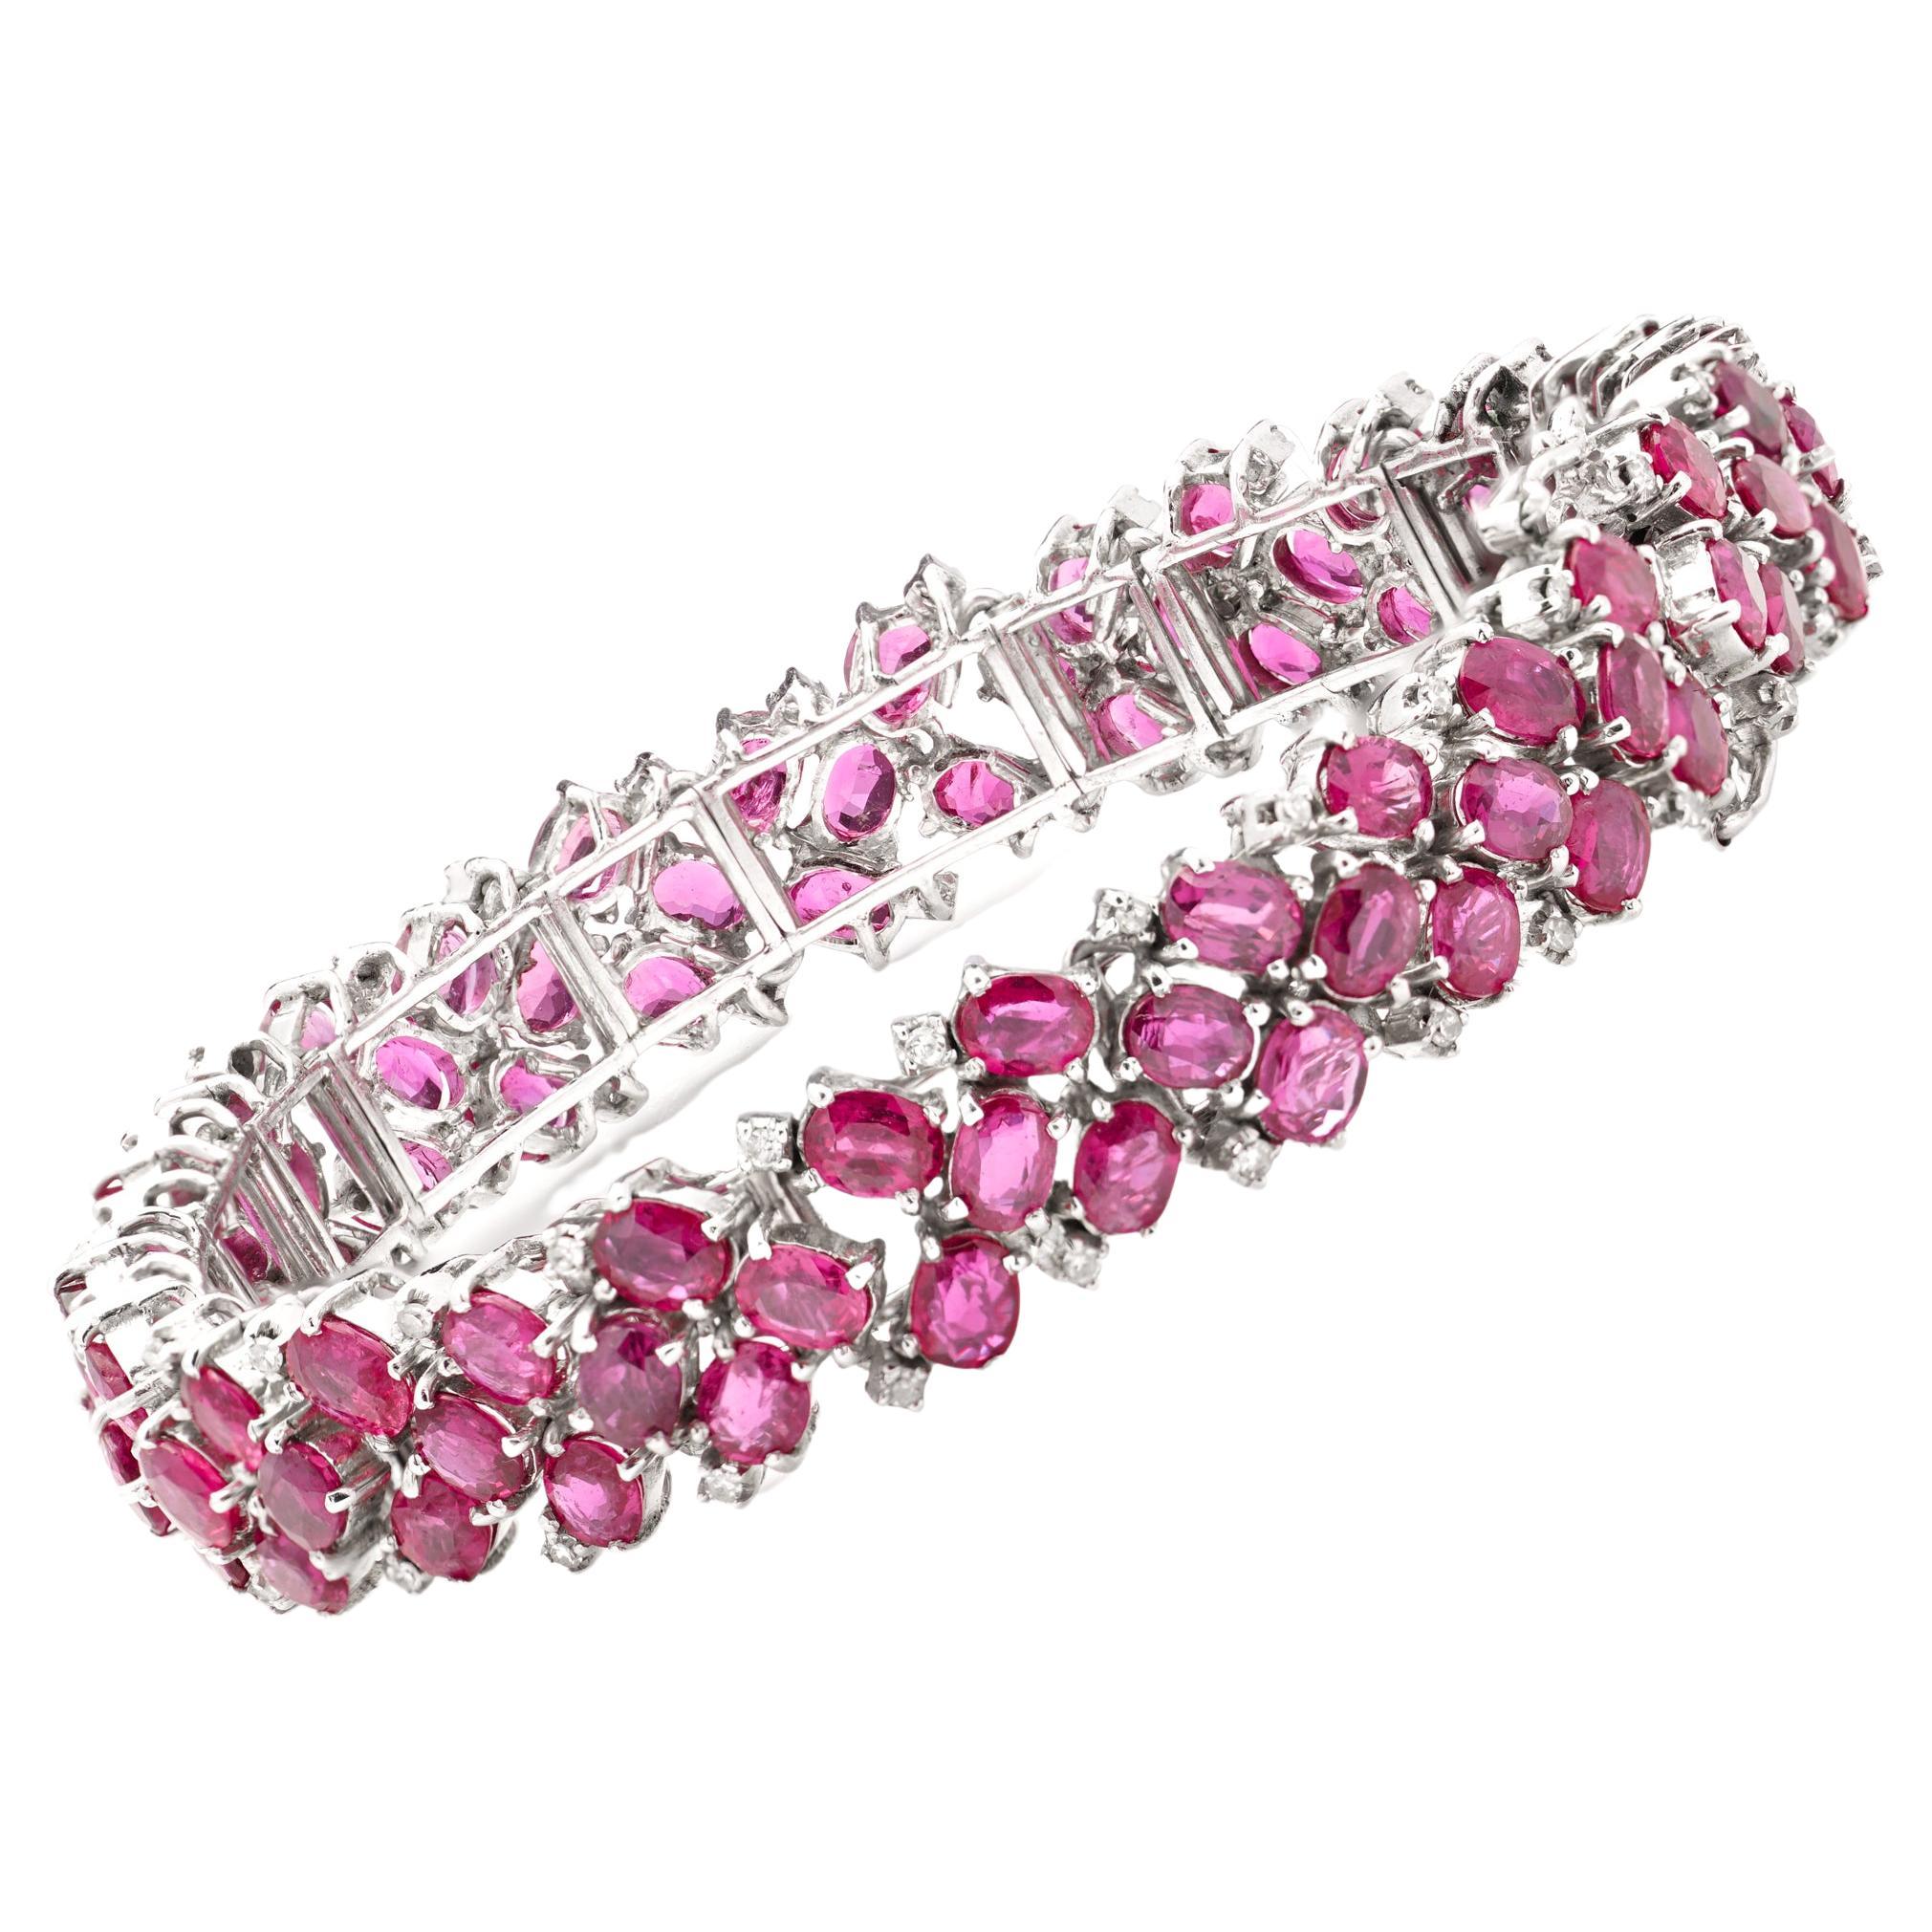 14kt. white gold link bracelet set with 22.5 carats of oval faceted rubies  For Sale